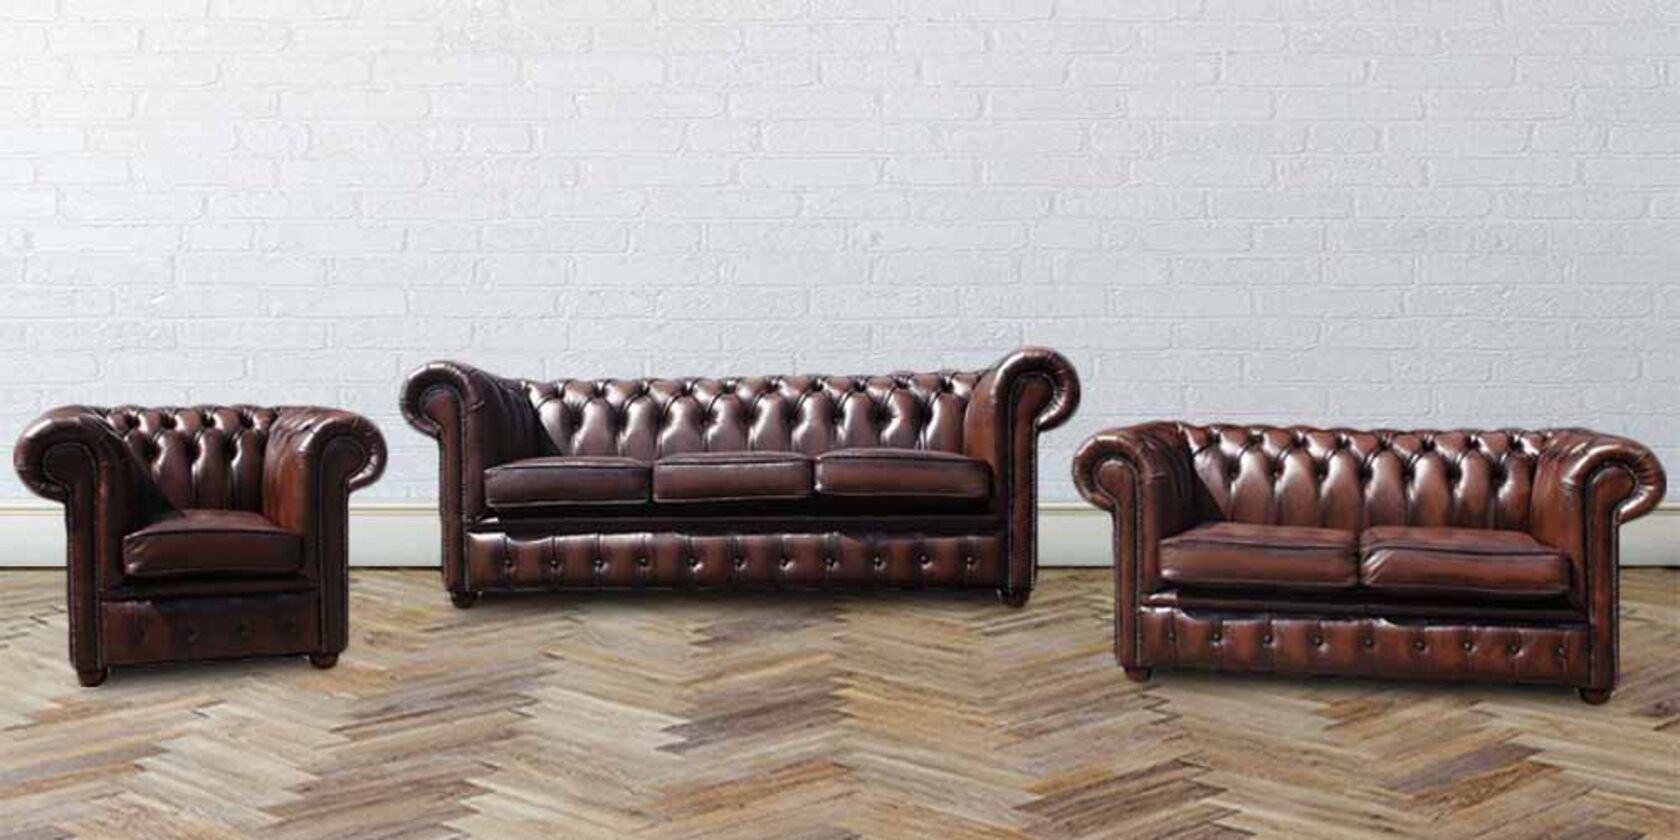 Chesterfield 3 2 1 Seater Real Antique, Leather Sofa Set 3 2 1